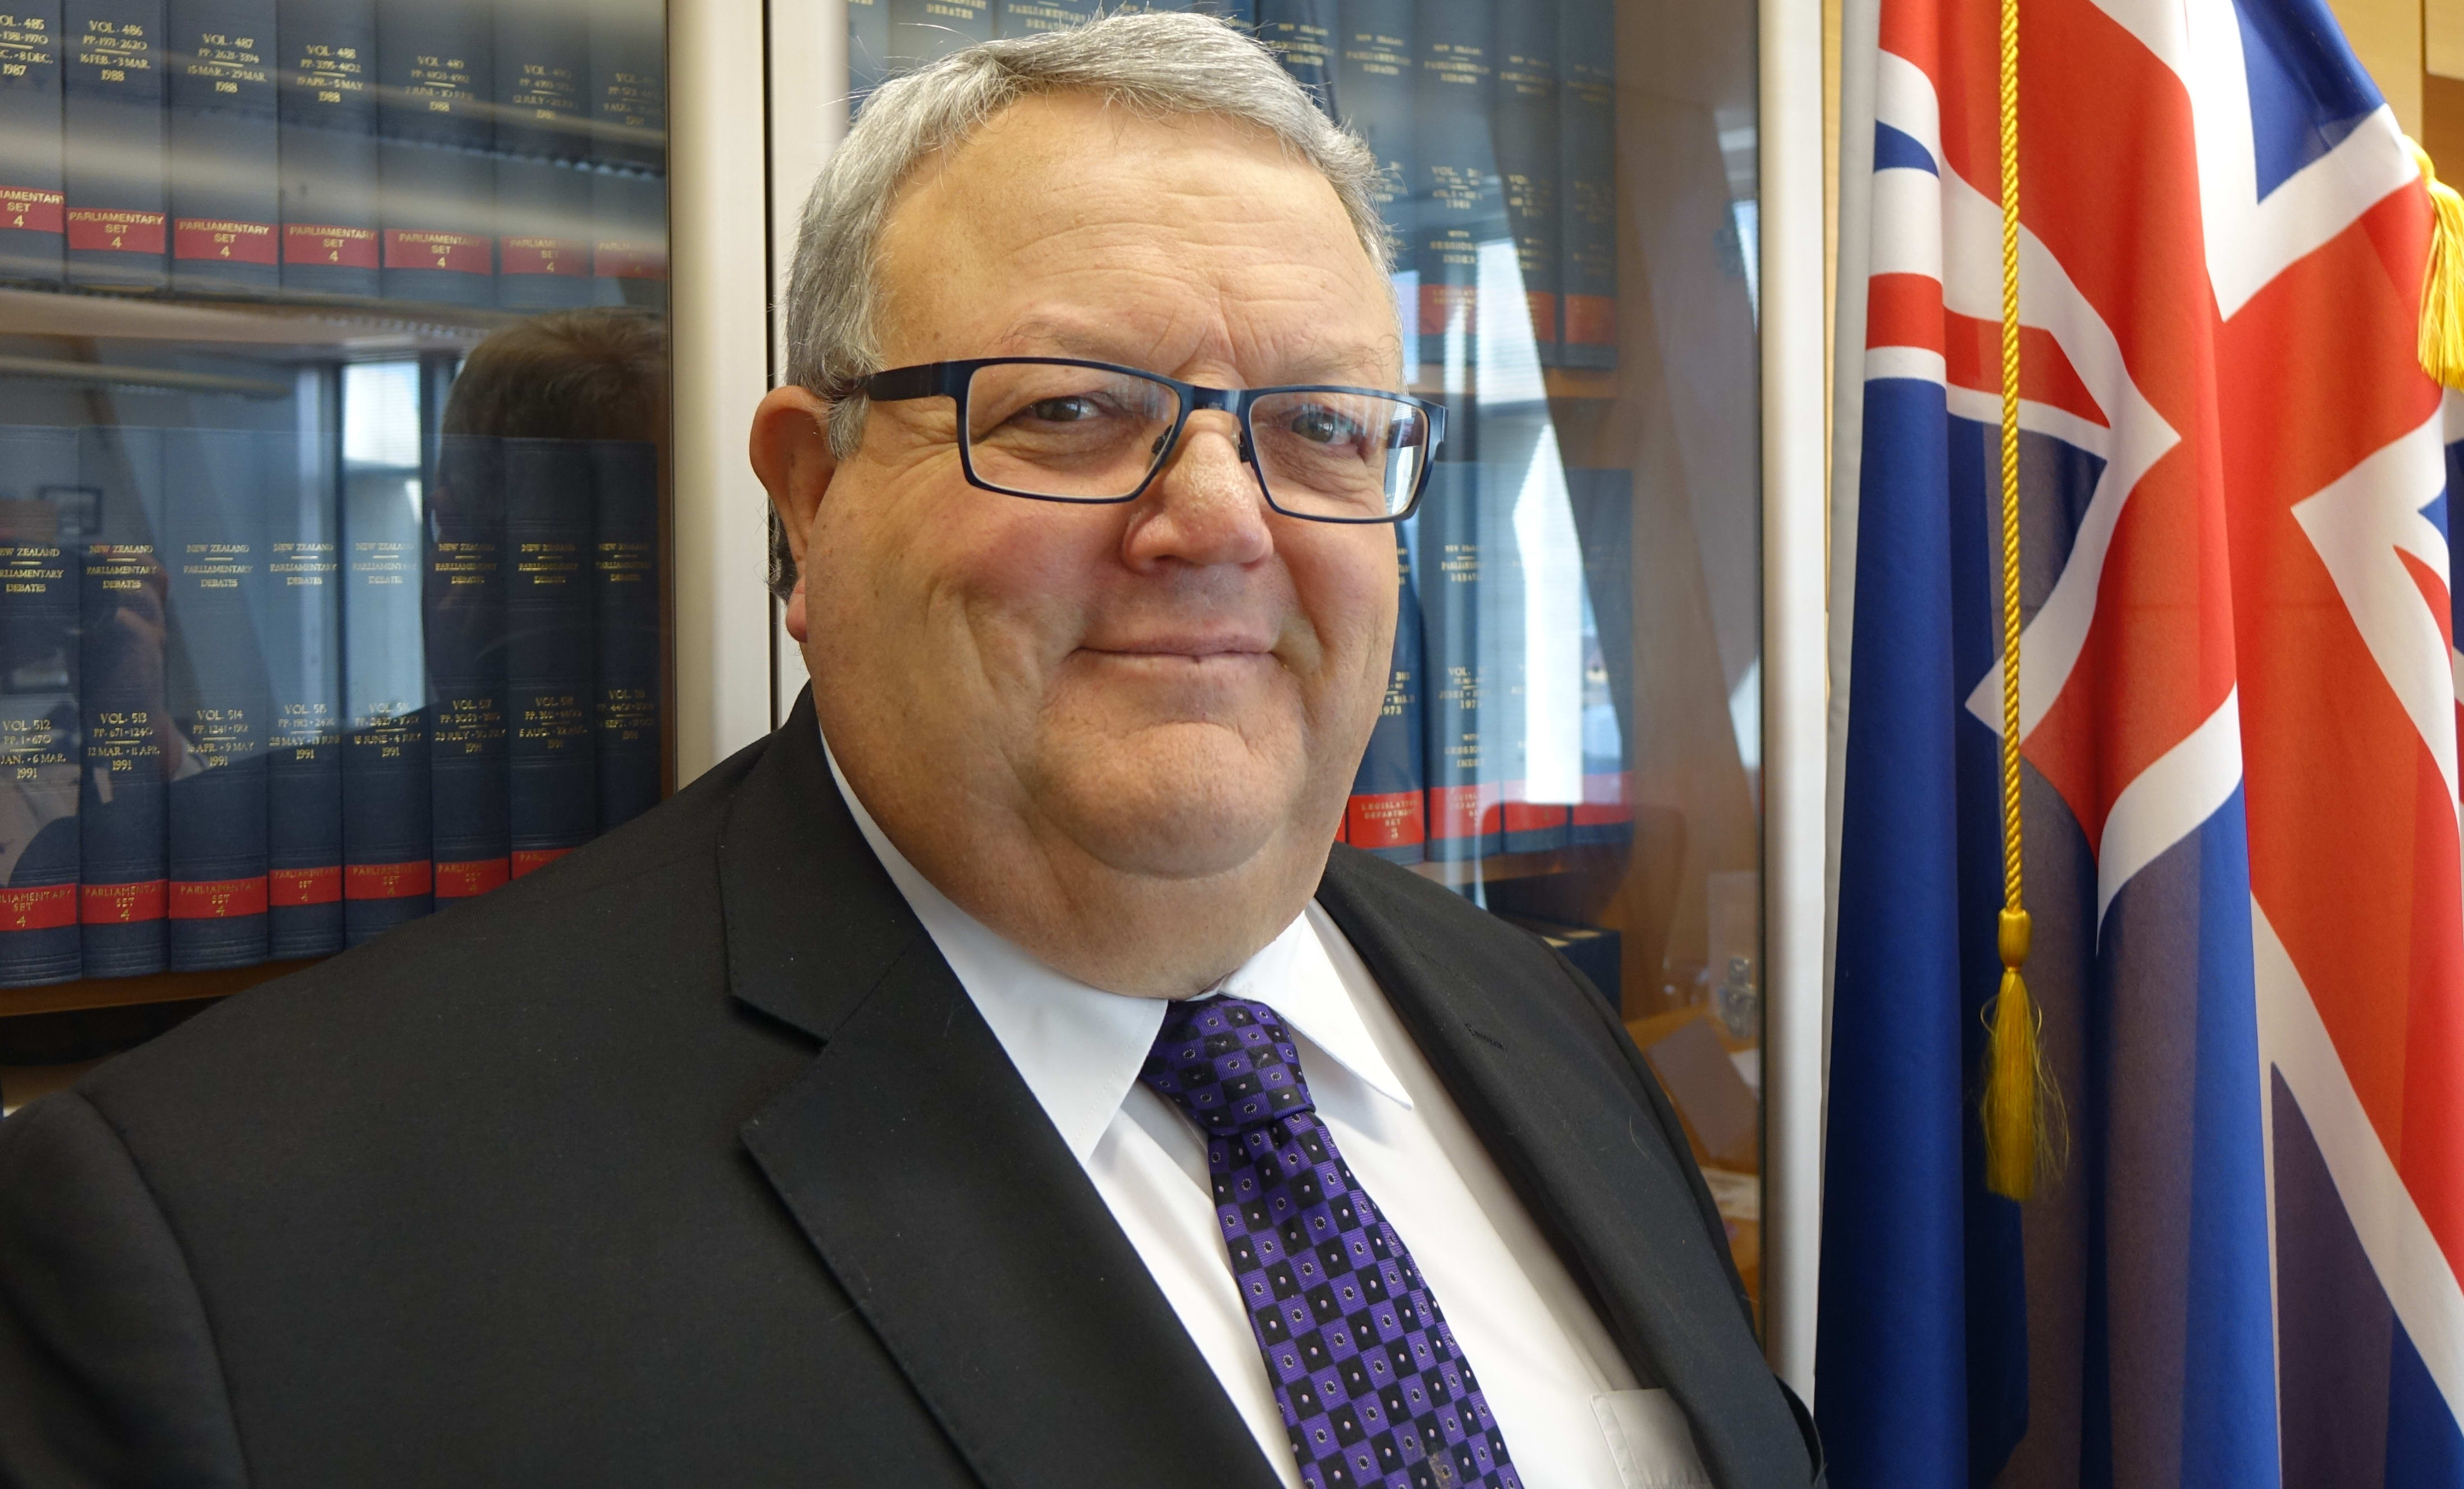 Gerry Brownlee has been Defence Minister and oversaw the Canterbury rebuild.